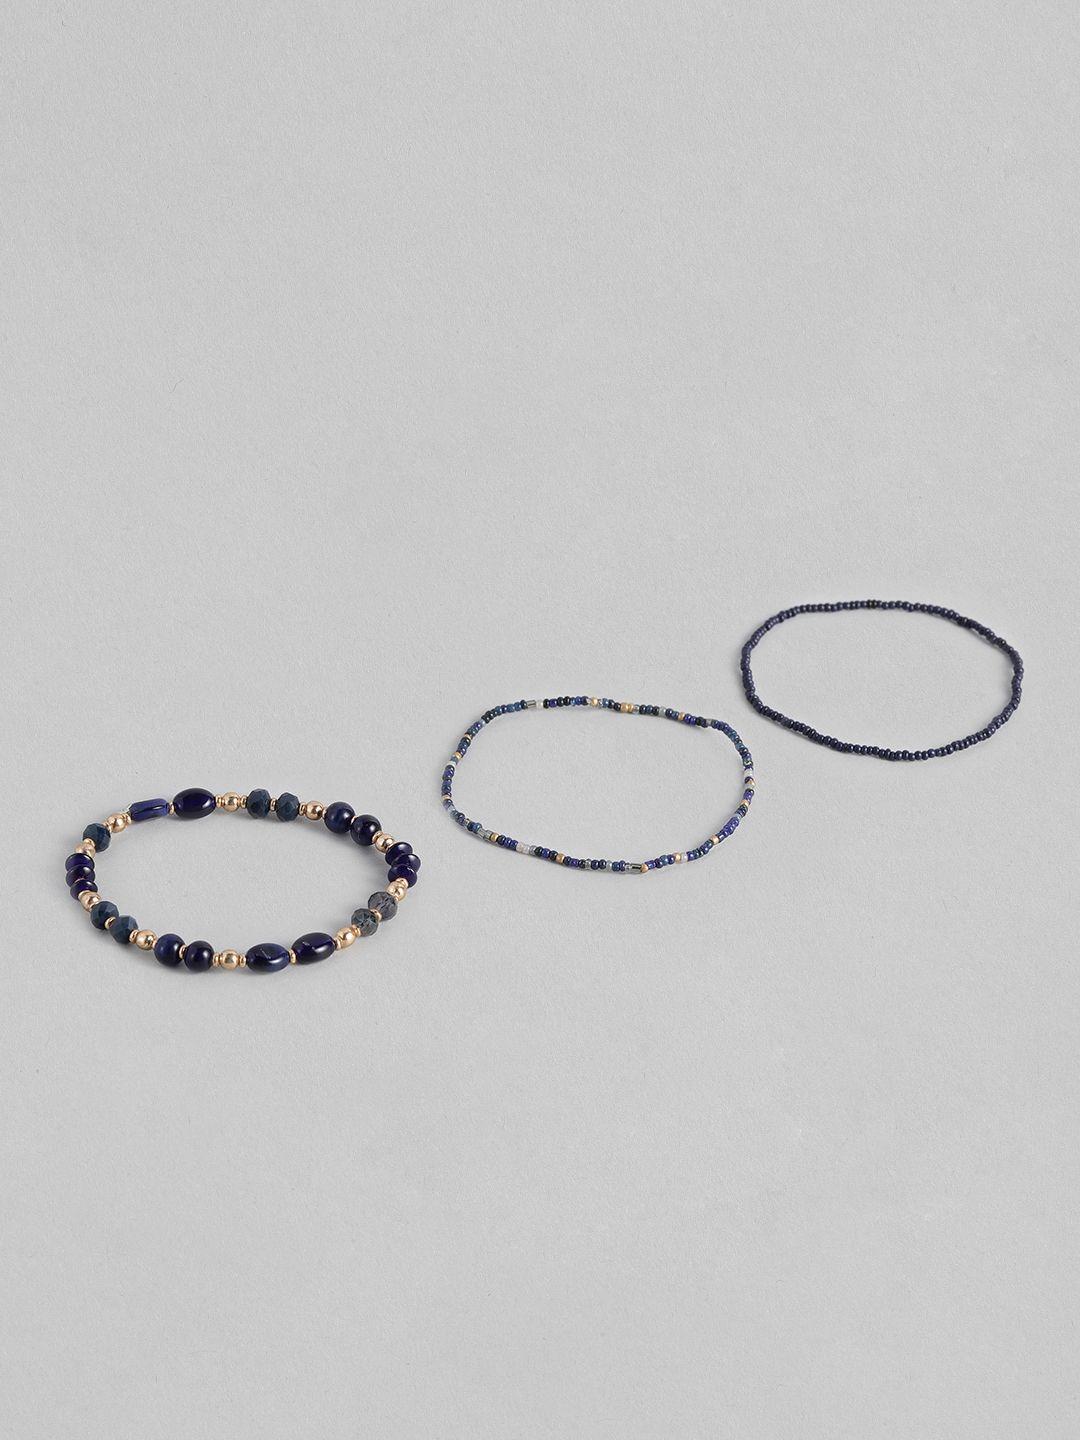 accessorize set of 3 navy blue beaded handcrafted elasticated bracelets